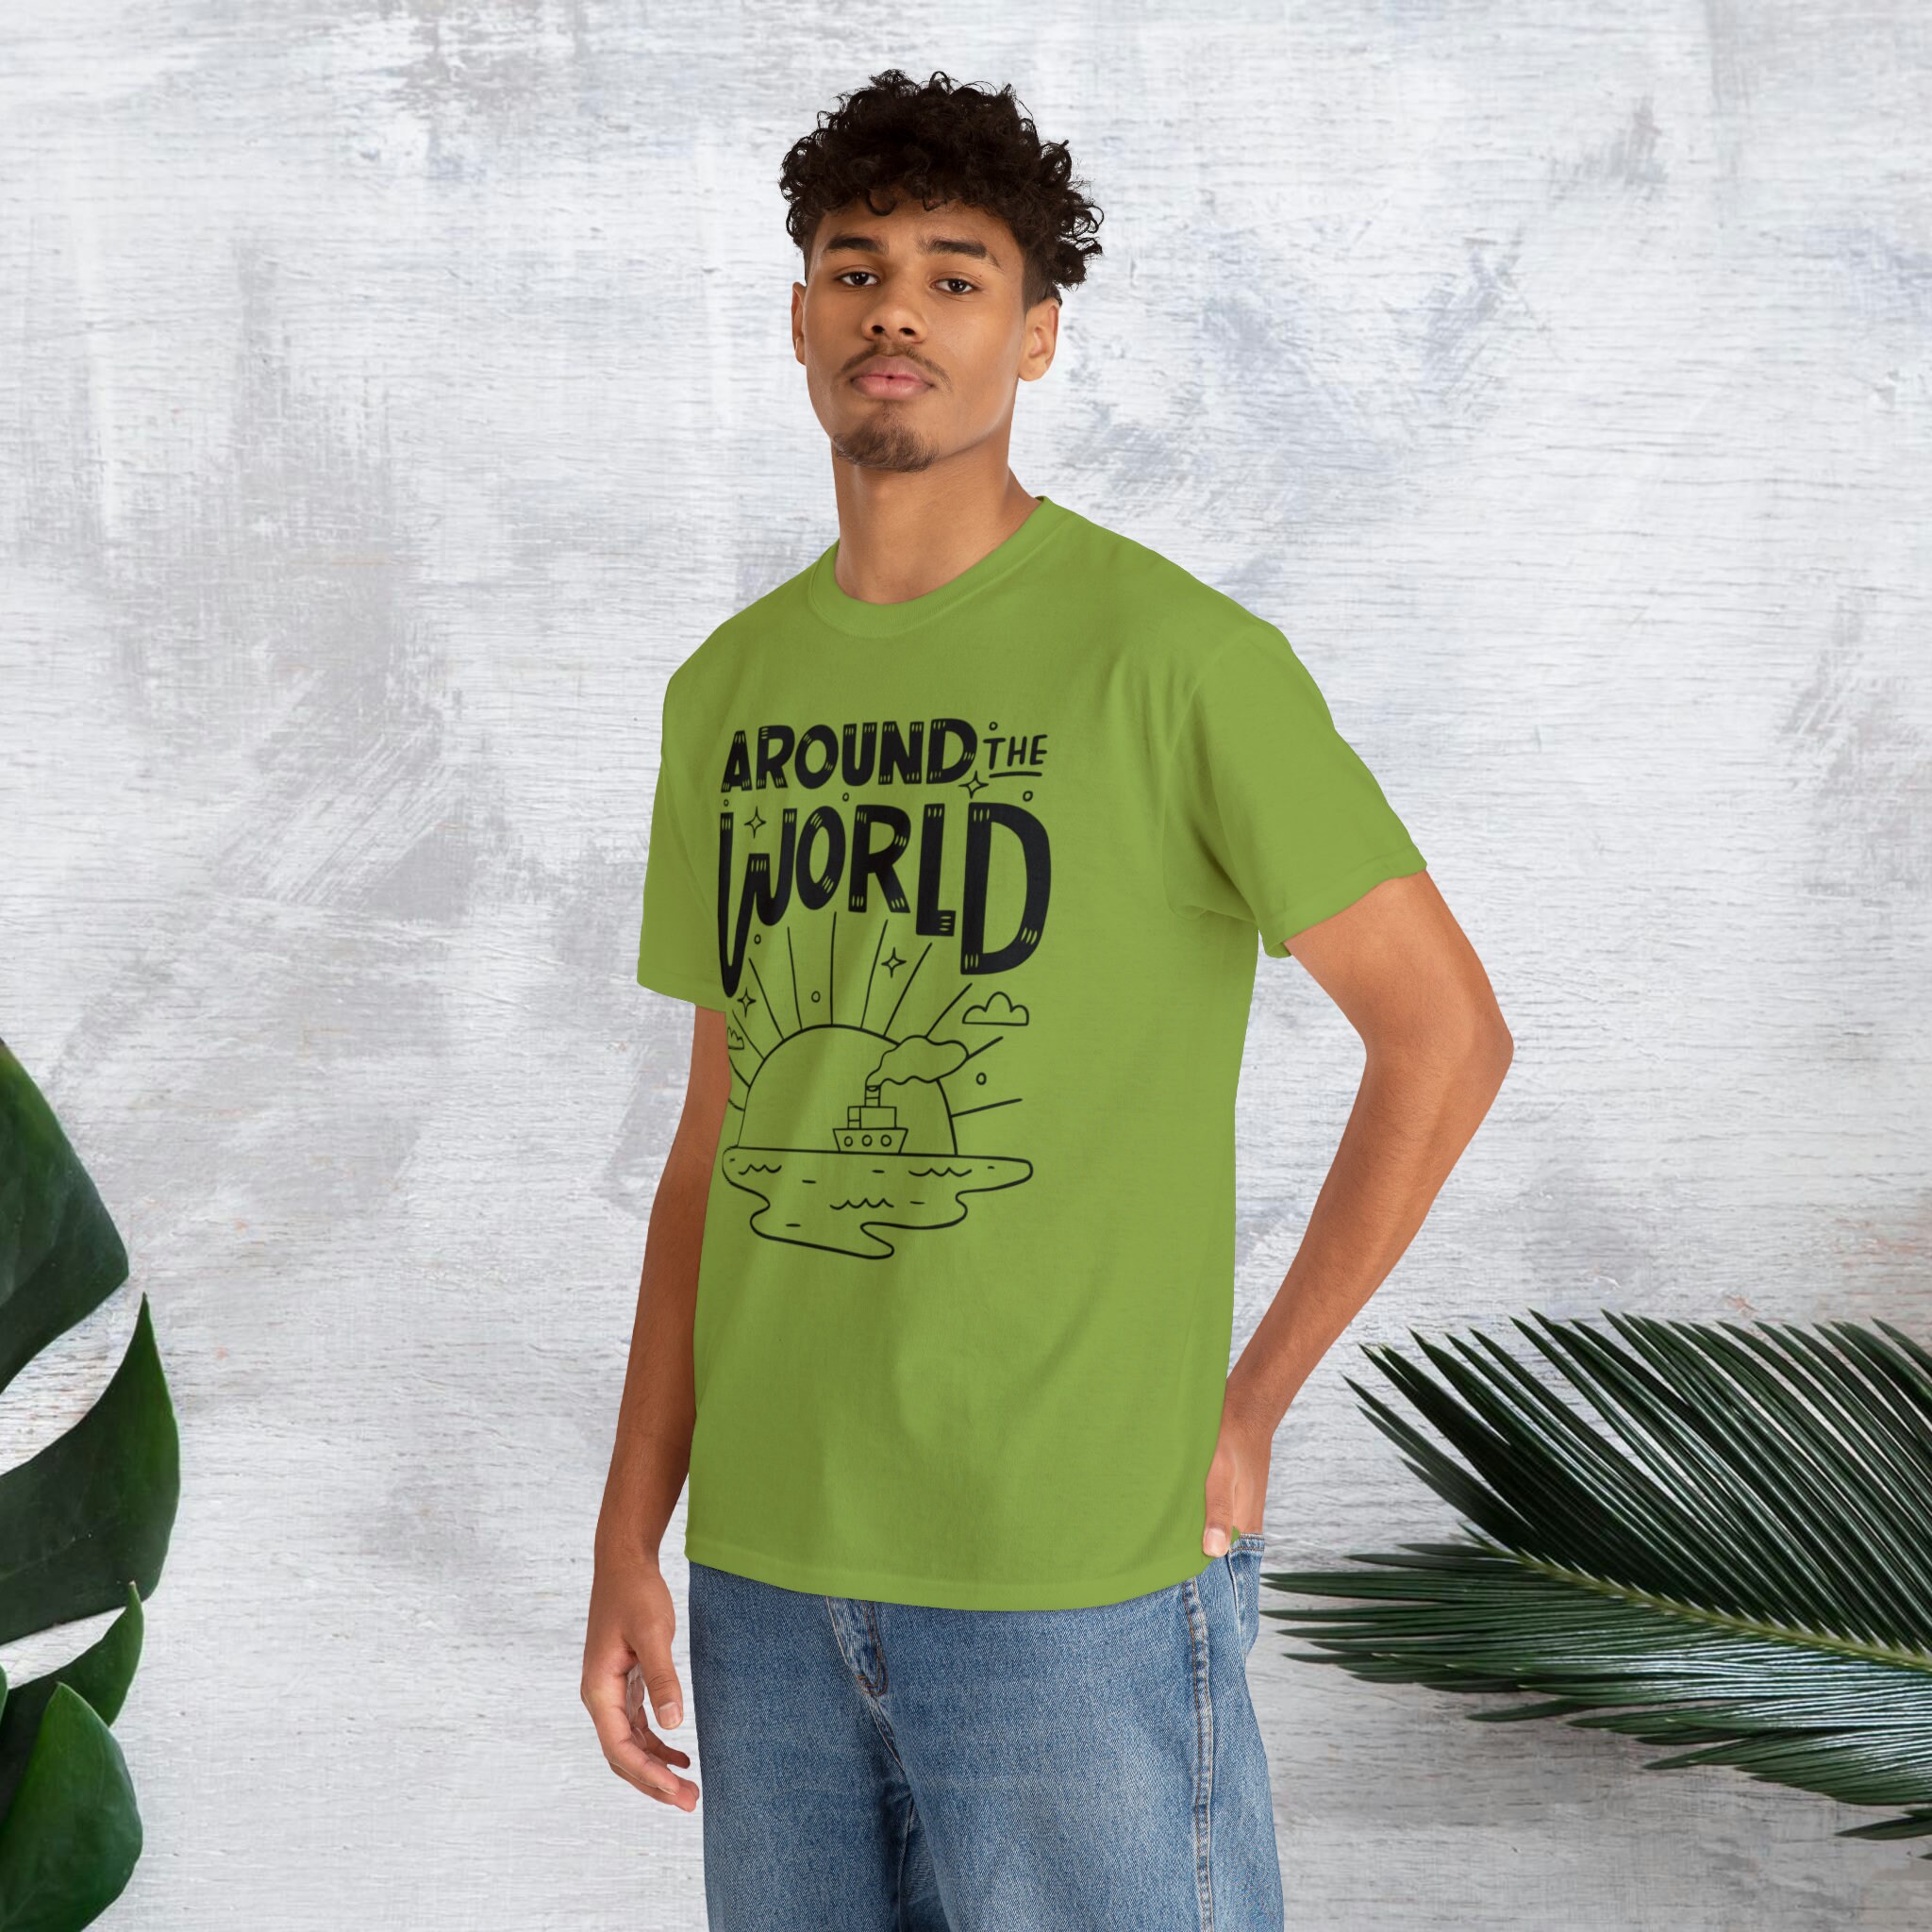 Discover Around The World Adventure T-Shirts - Unisex Cotton T-Shirts - Classic fit T-Shirts Available Multiple Sizes & Multiple Colors